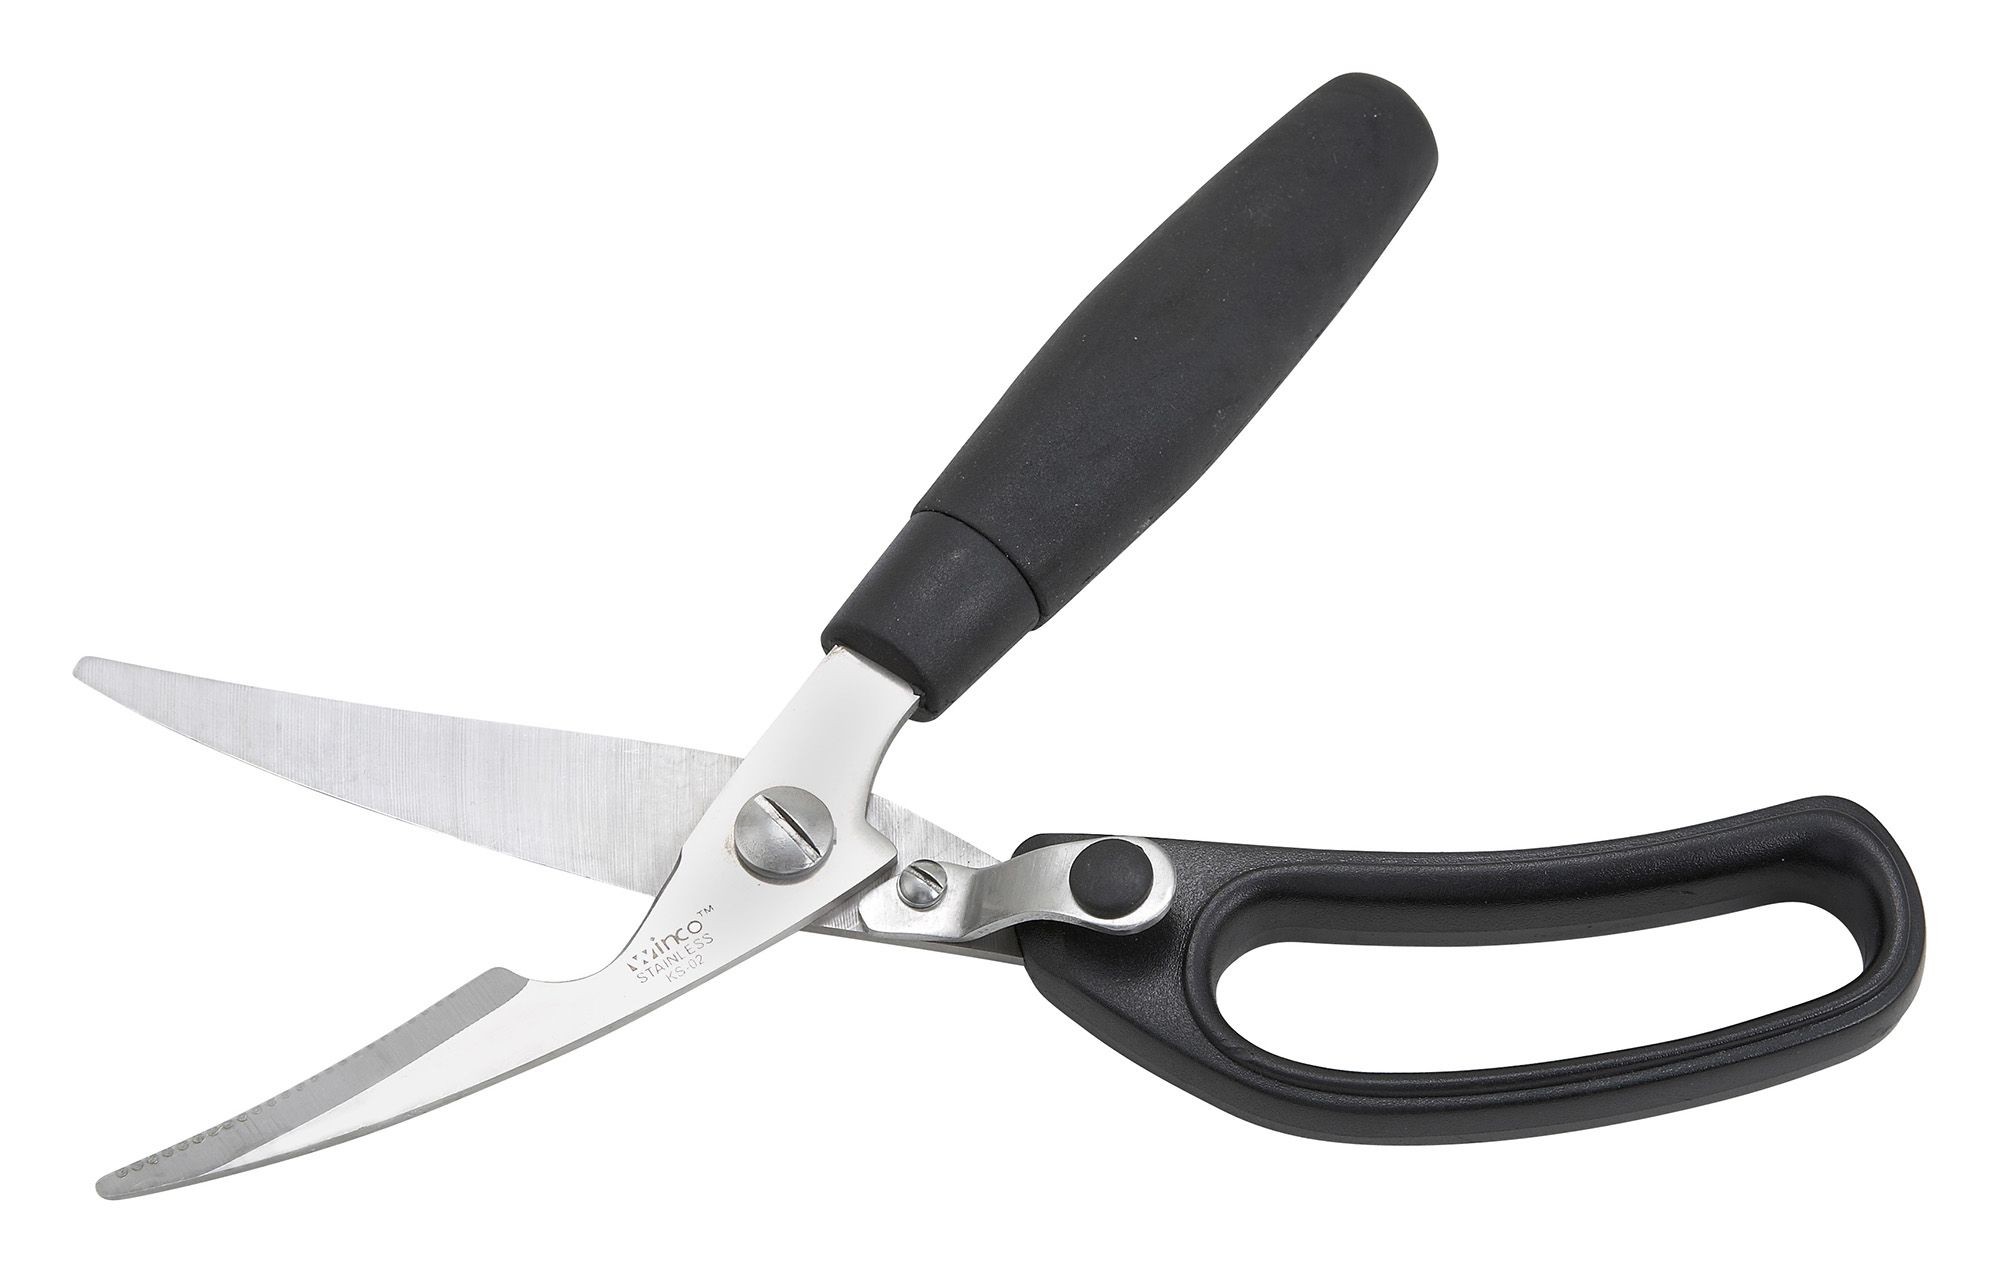 Winco KS-02 Stainless Steel Poultry Shears with Soft Rubber Handle